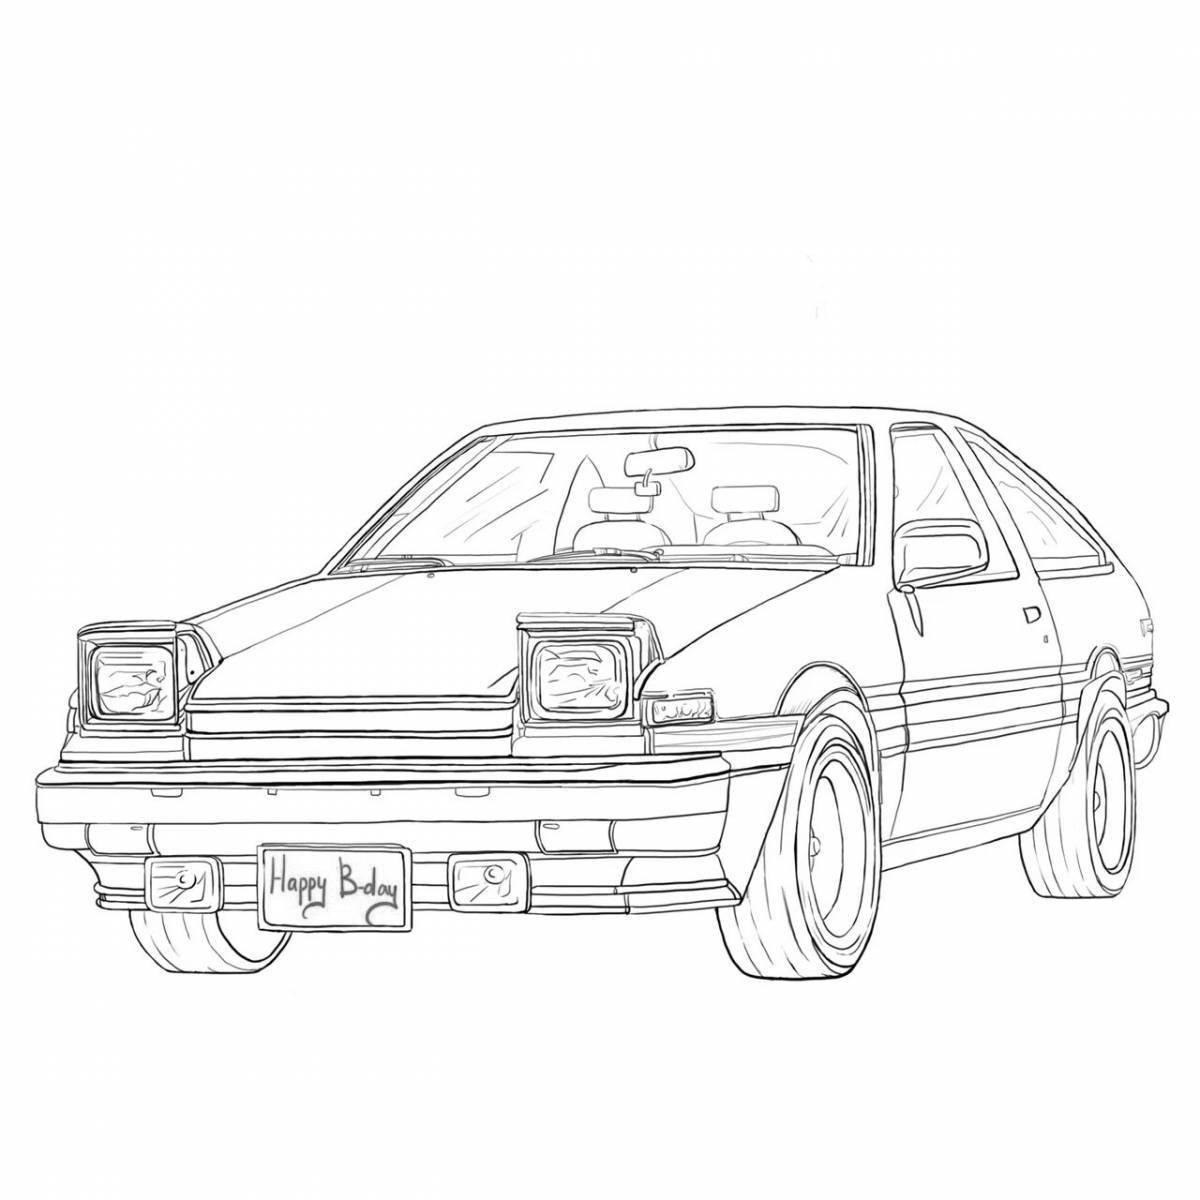 Ae86 playful coloring page